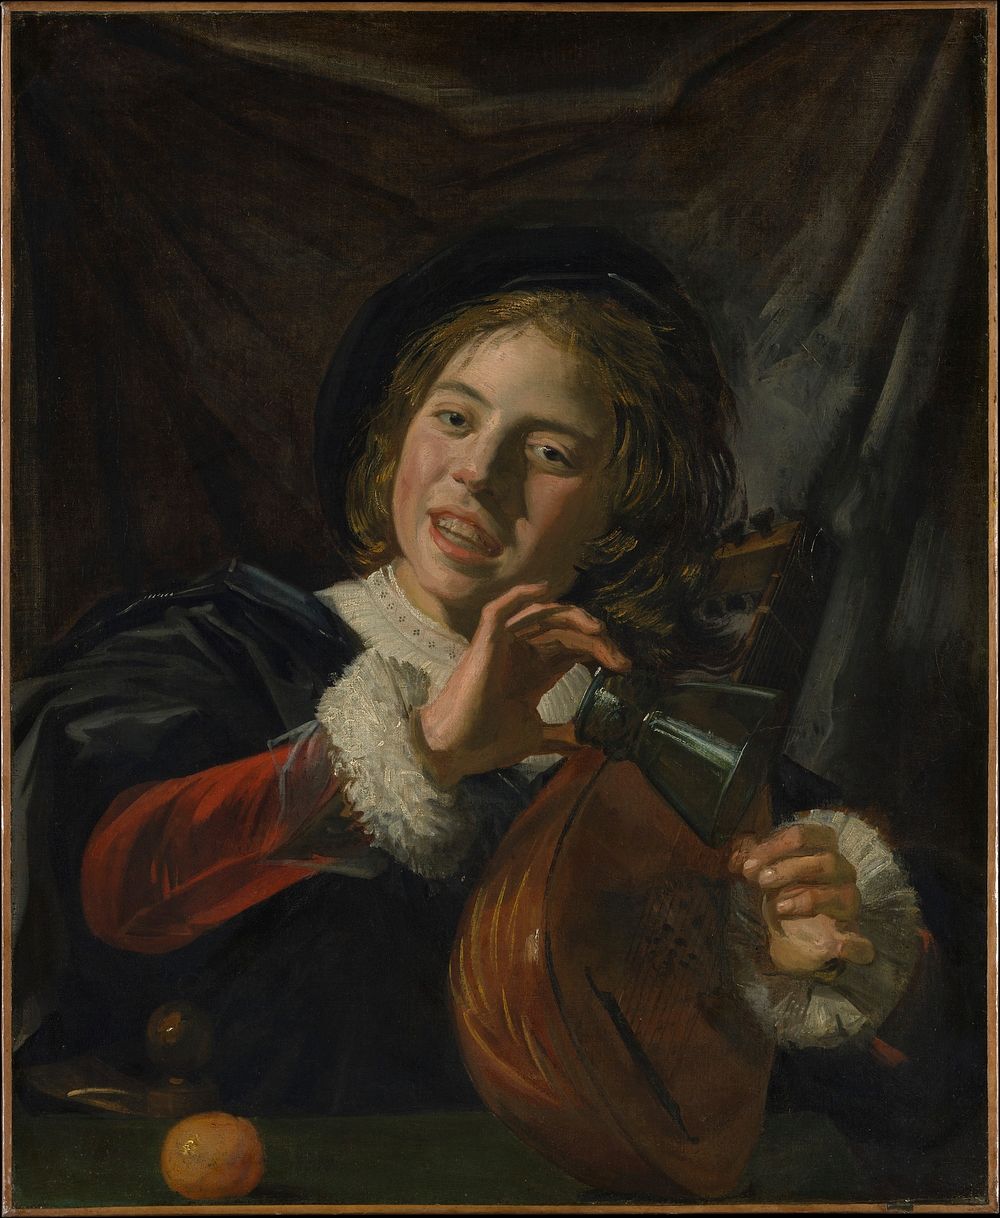 Boy with a Lute by Frans Hals